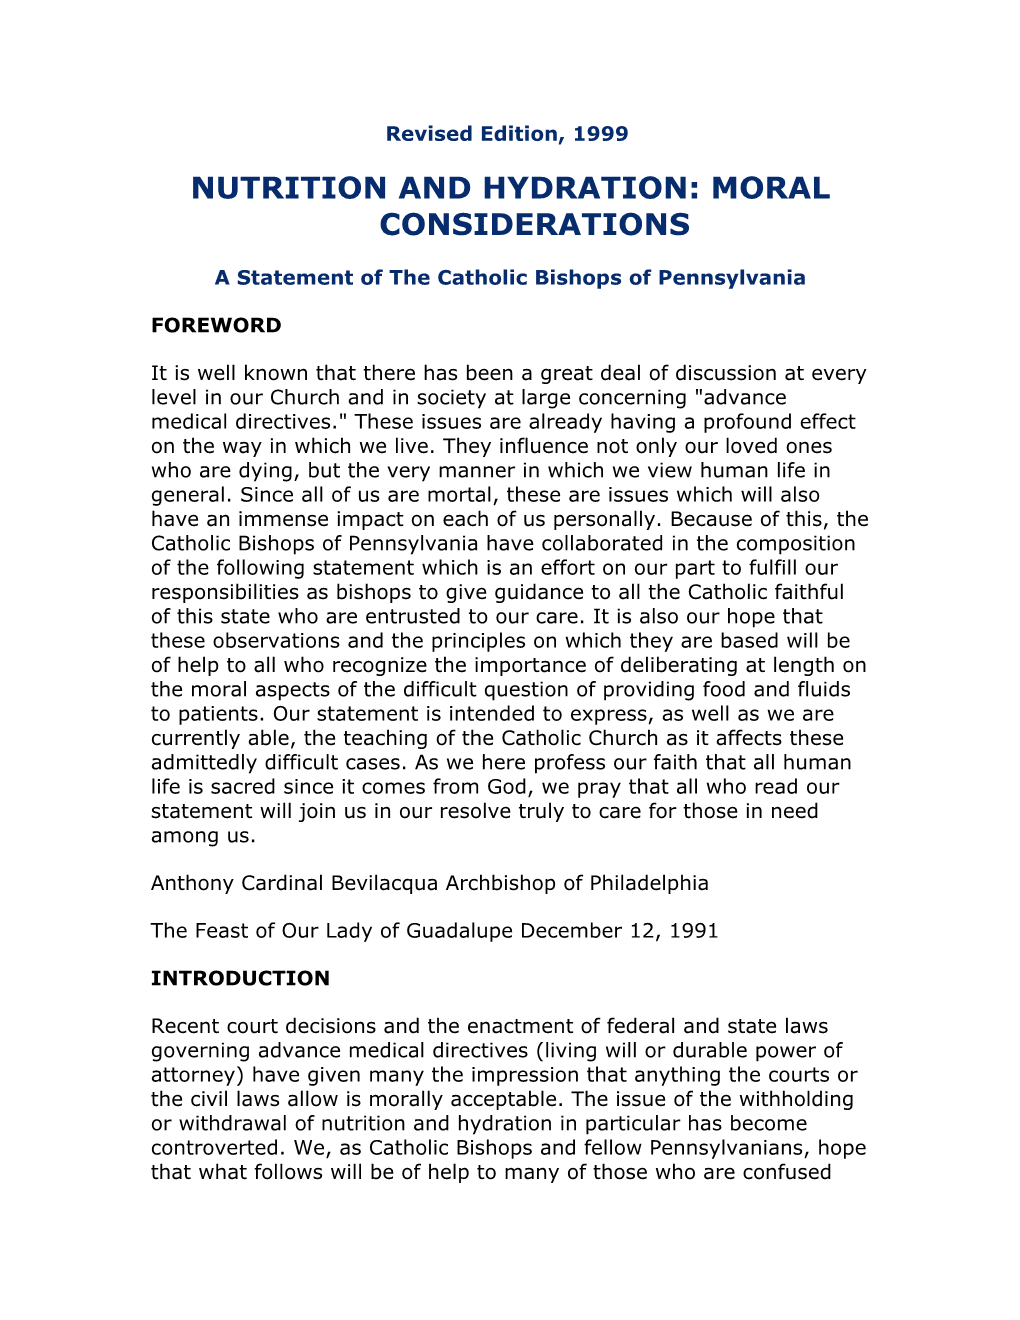 Nutrition and Hydration: Moral Considerations